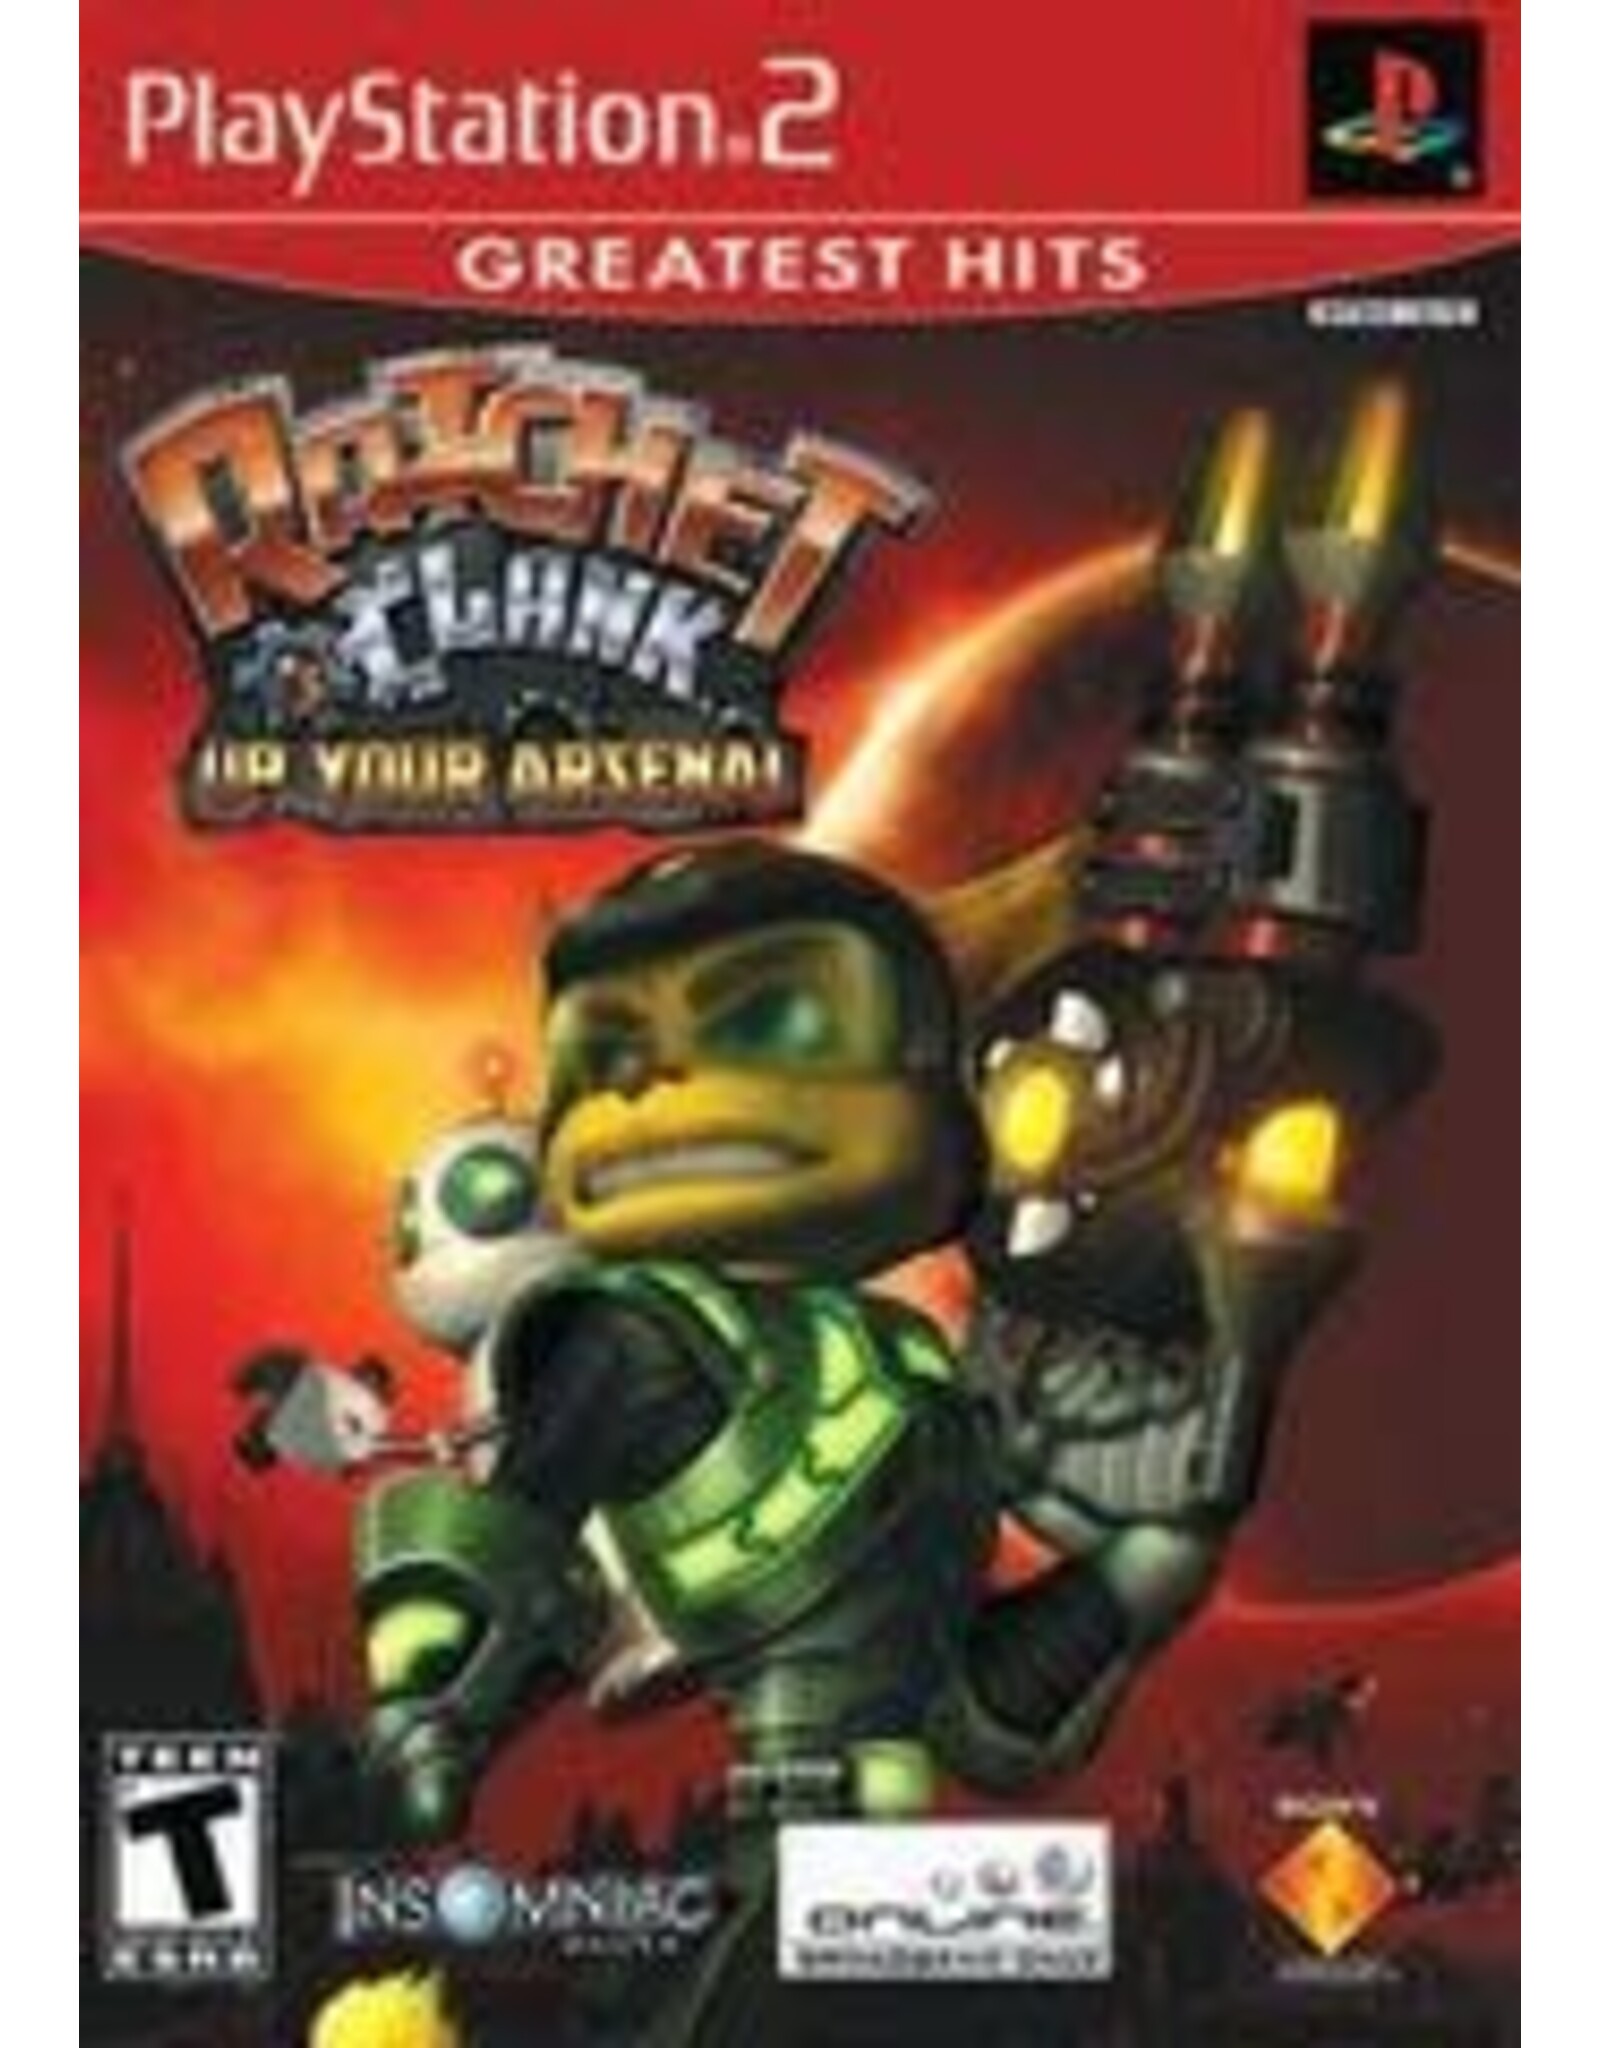 Playstation 2 Ratchet & Clank Up Your Arsenal (Greatest Hits, No Manual)